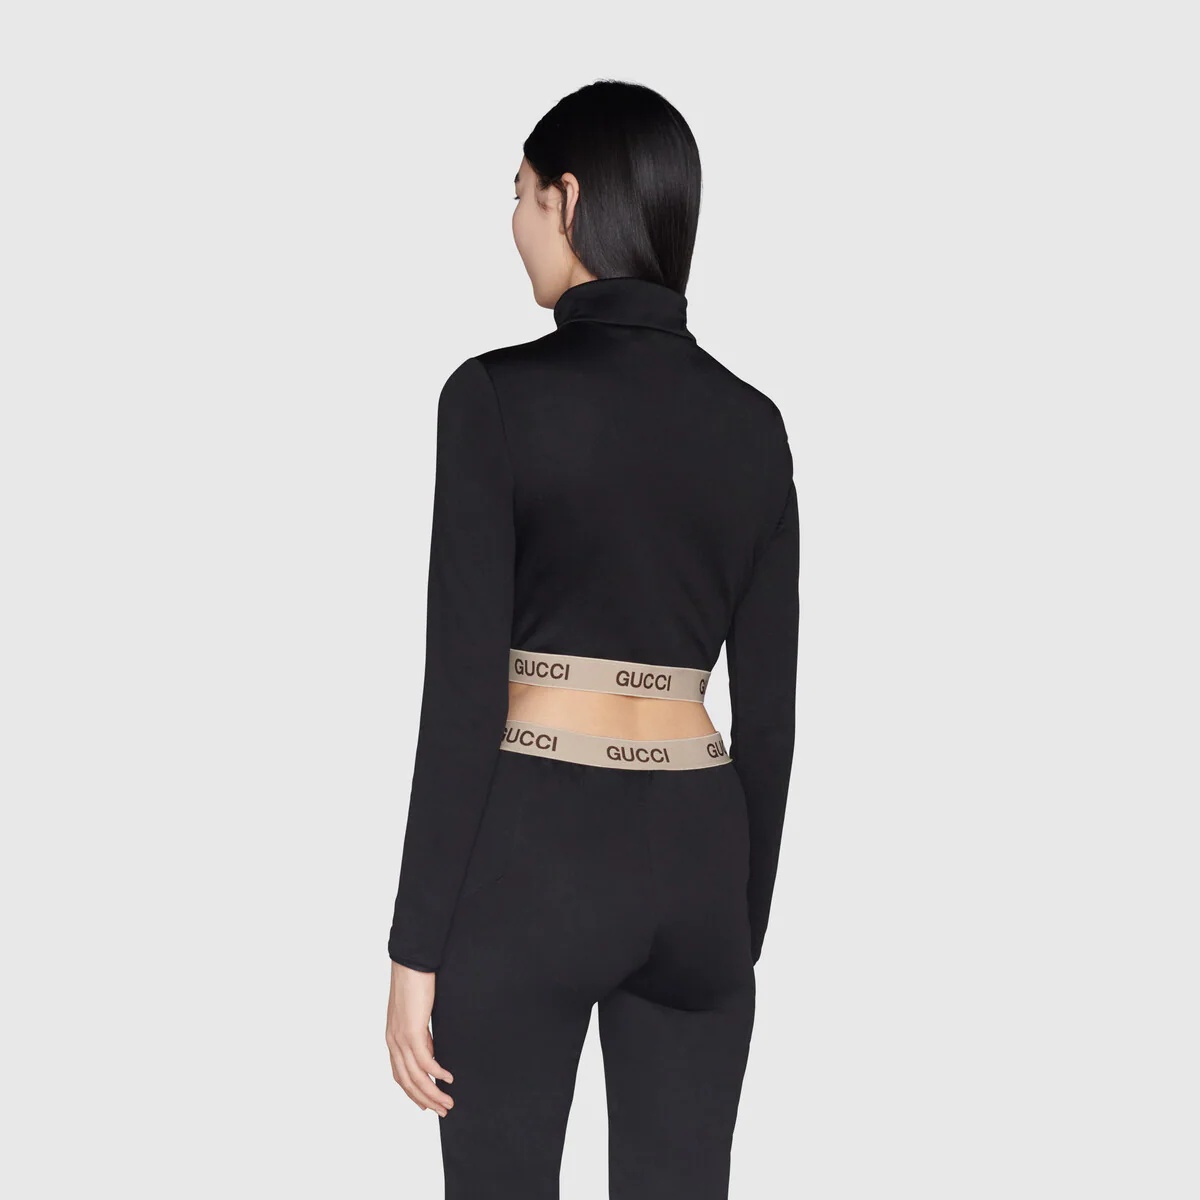 The North Face x Gucci cropped top - 4